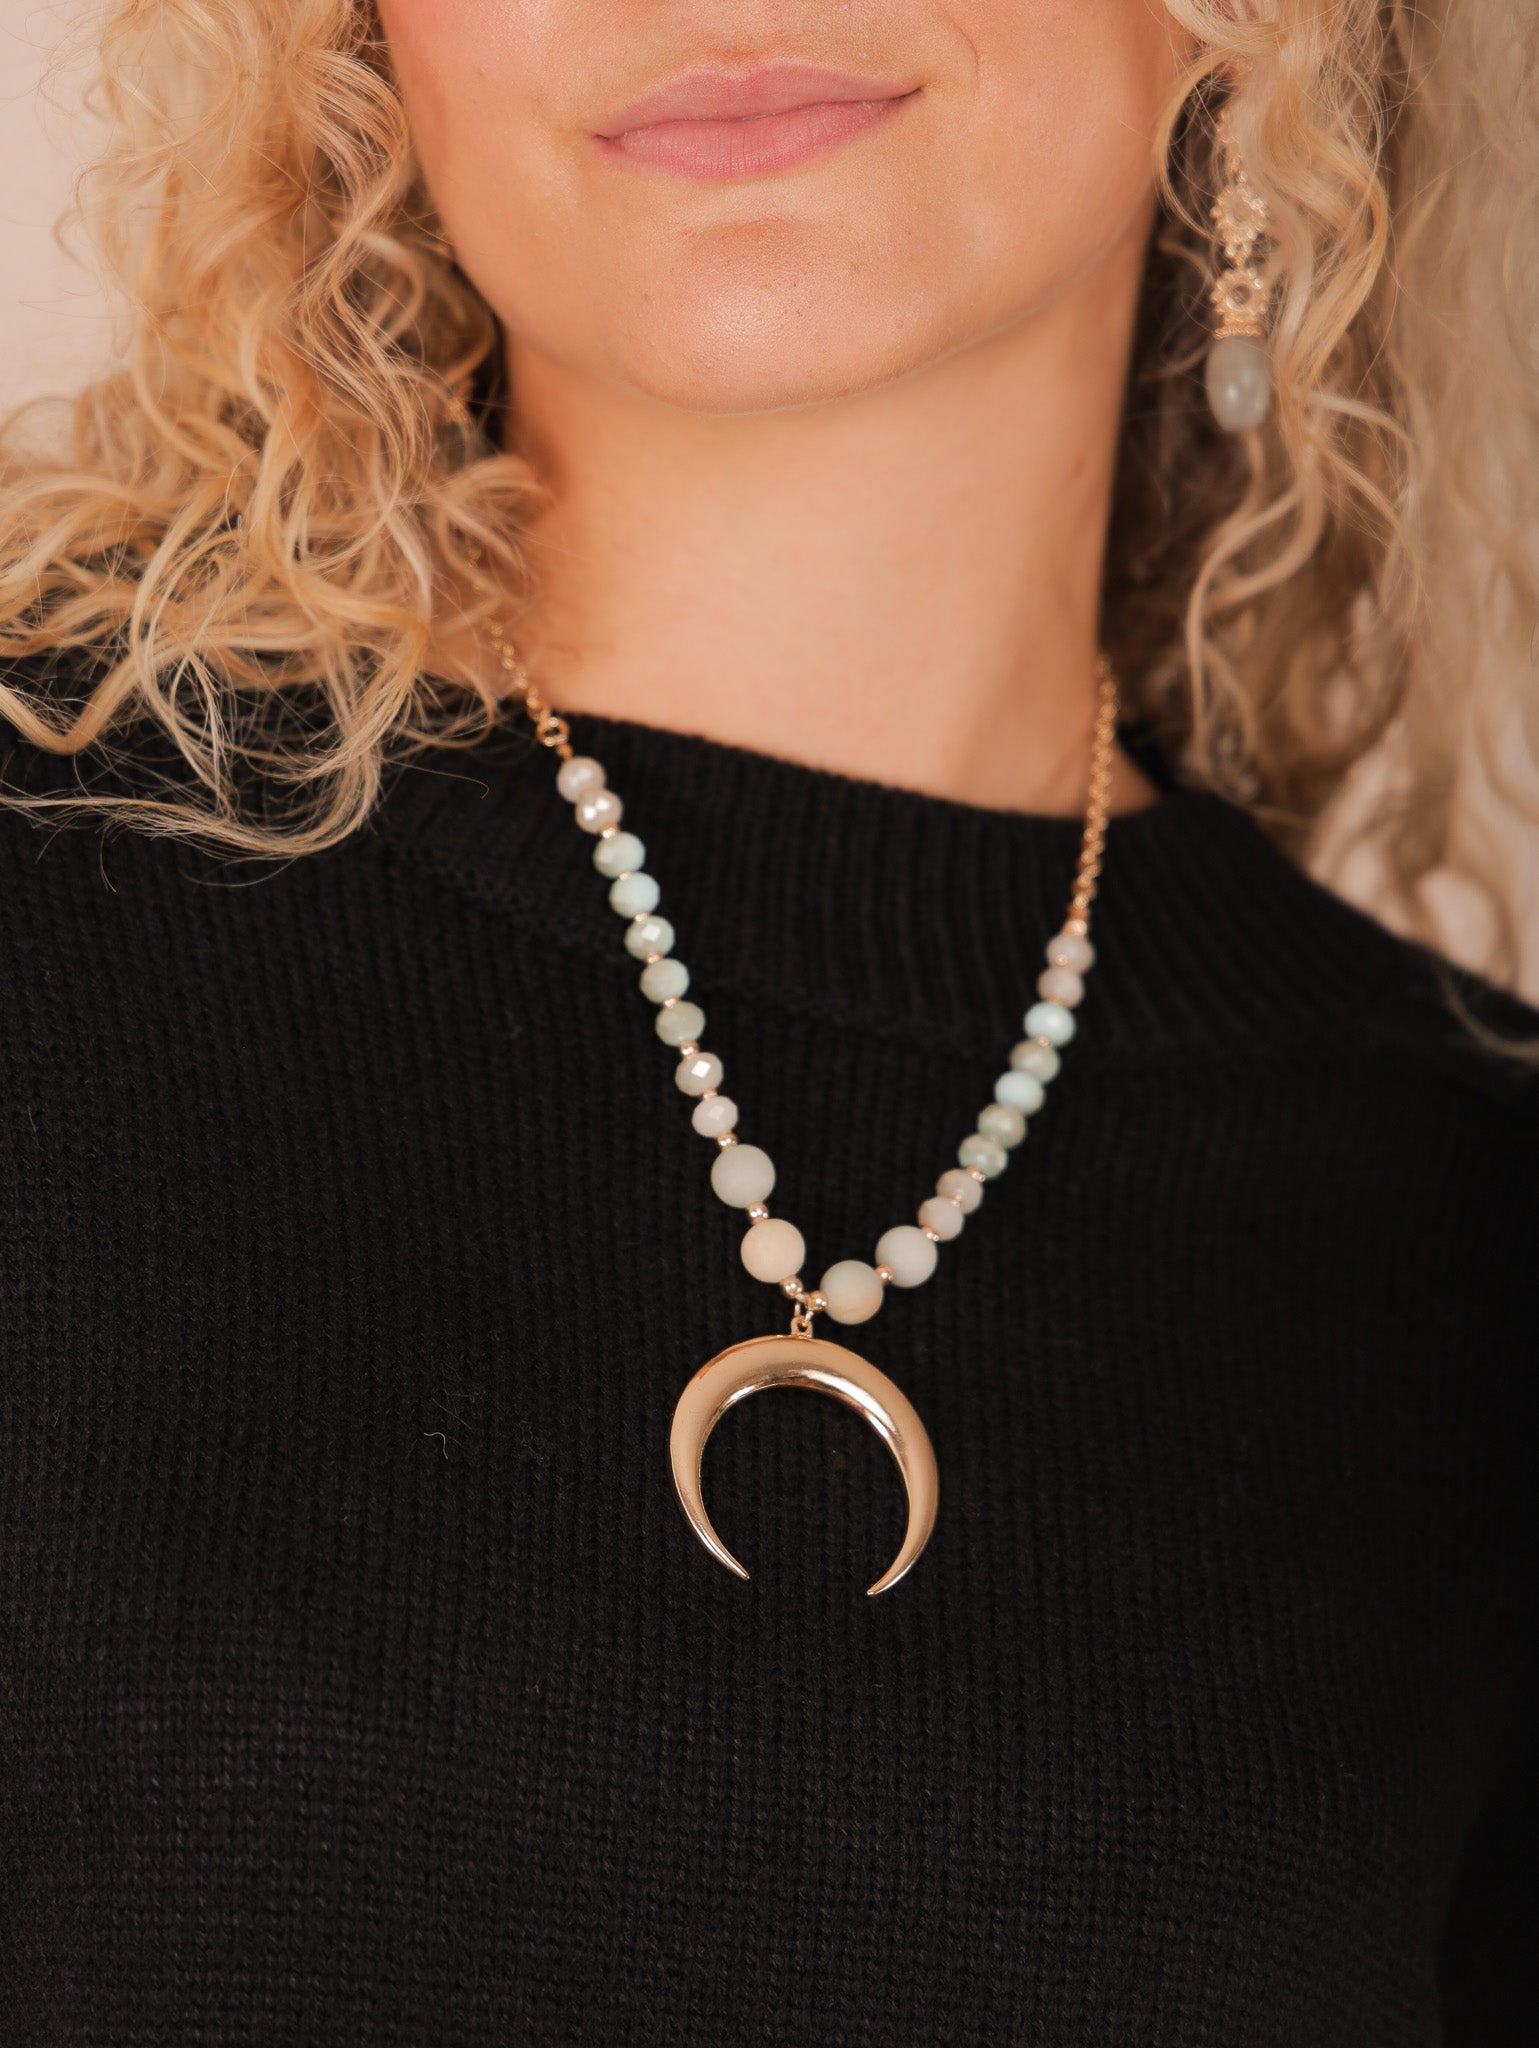 Molly Green - Where We Met Necklace - Jewelry